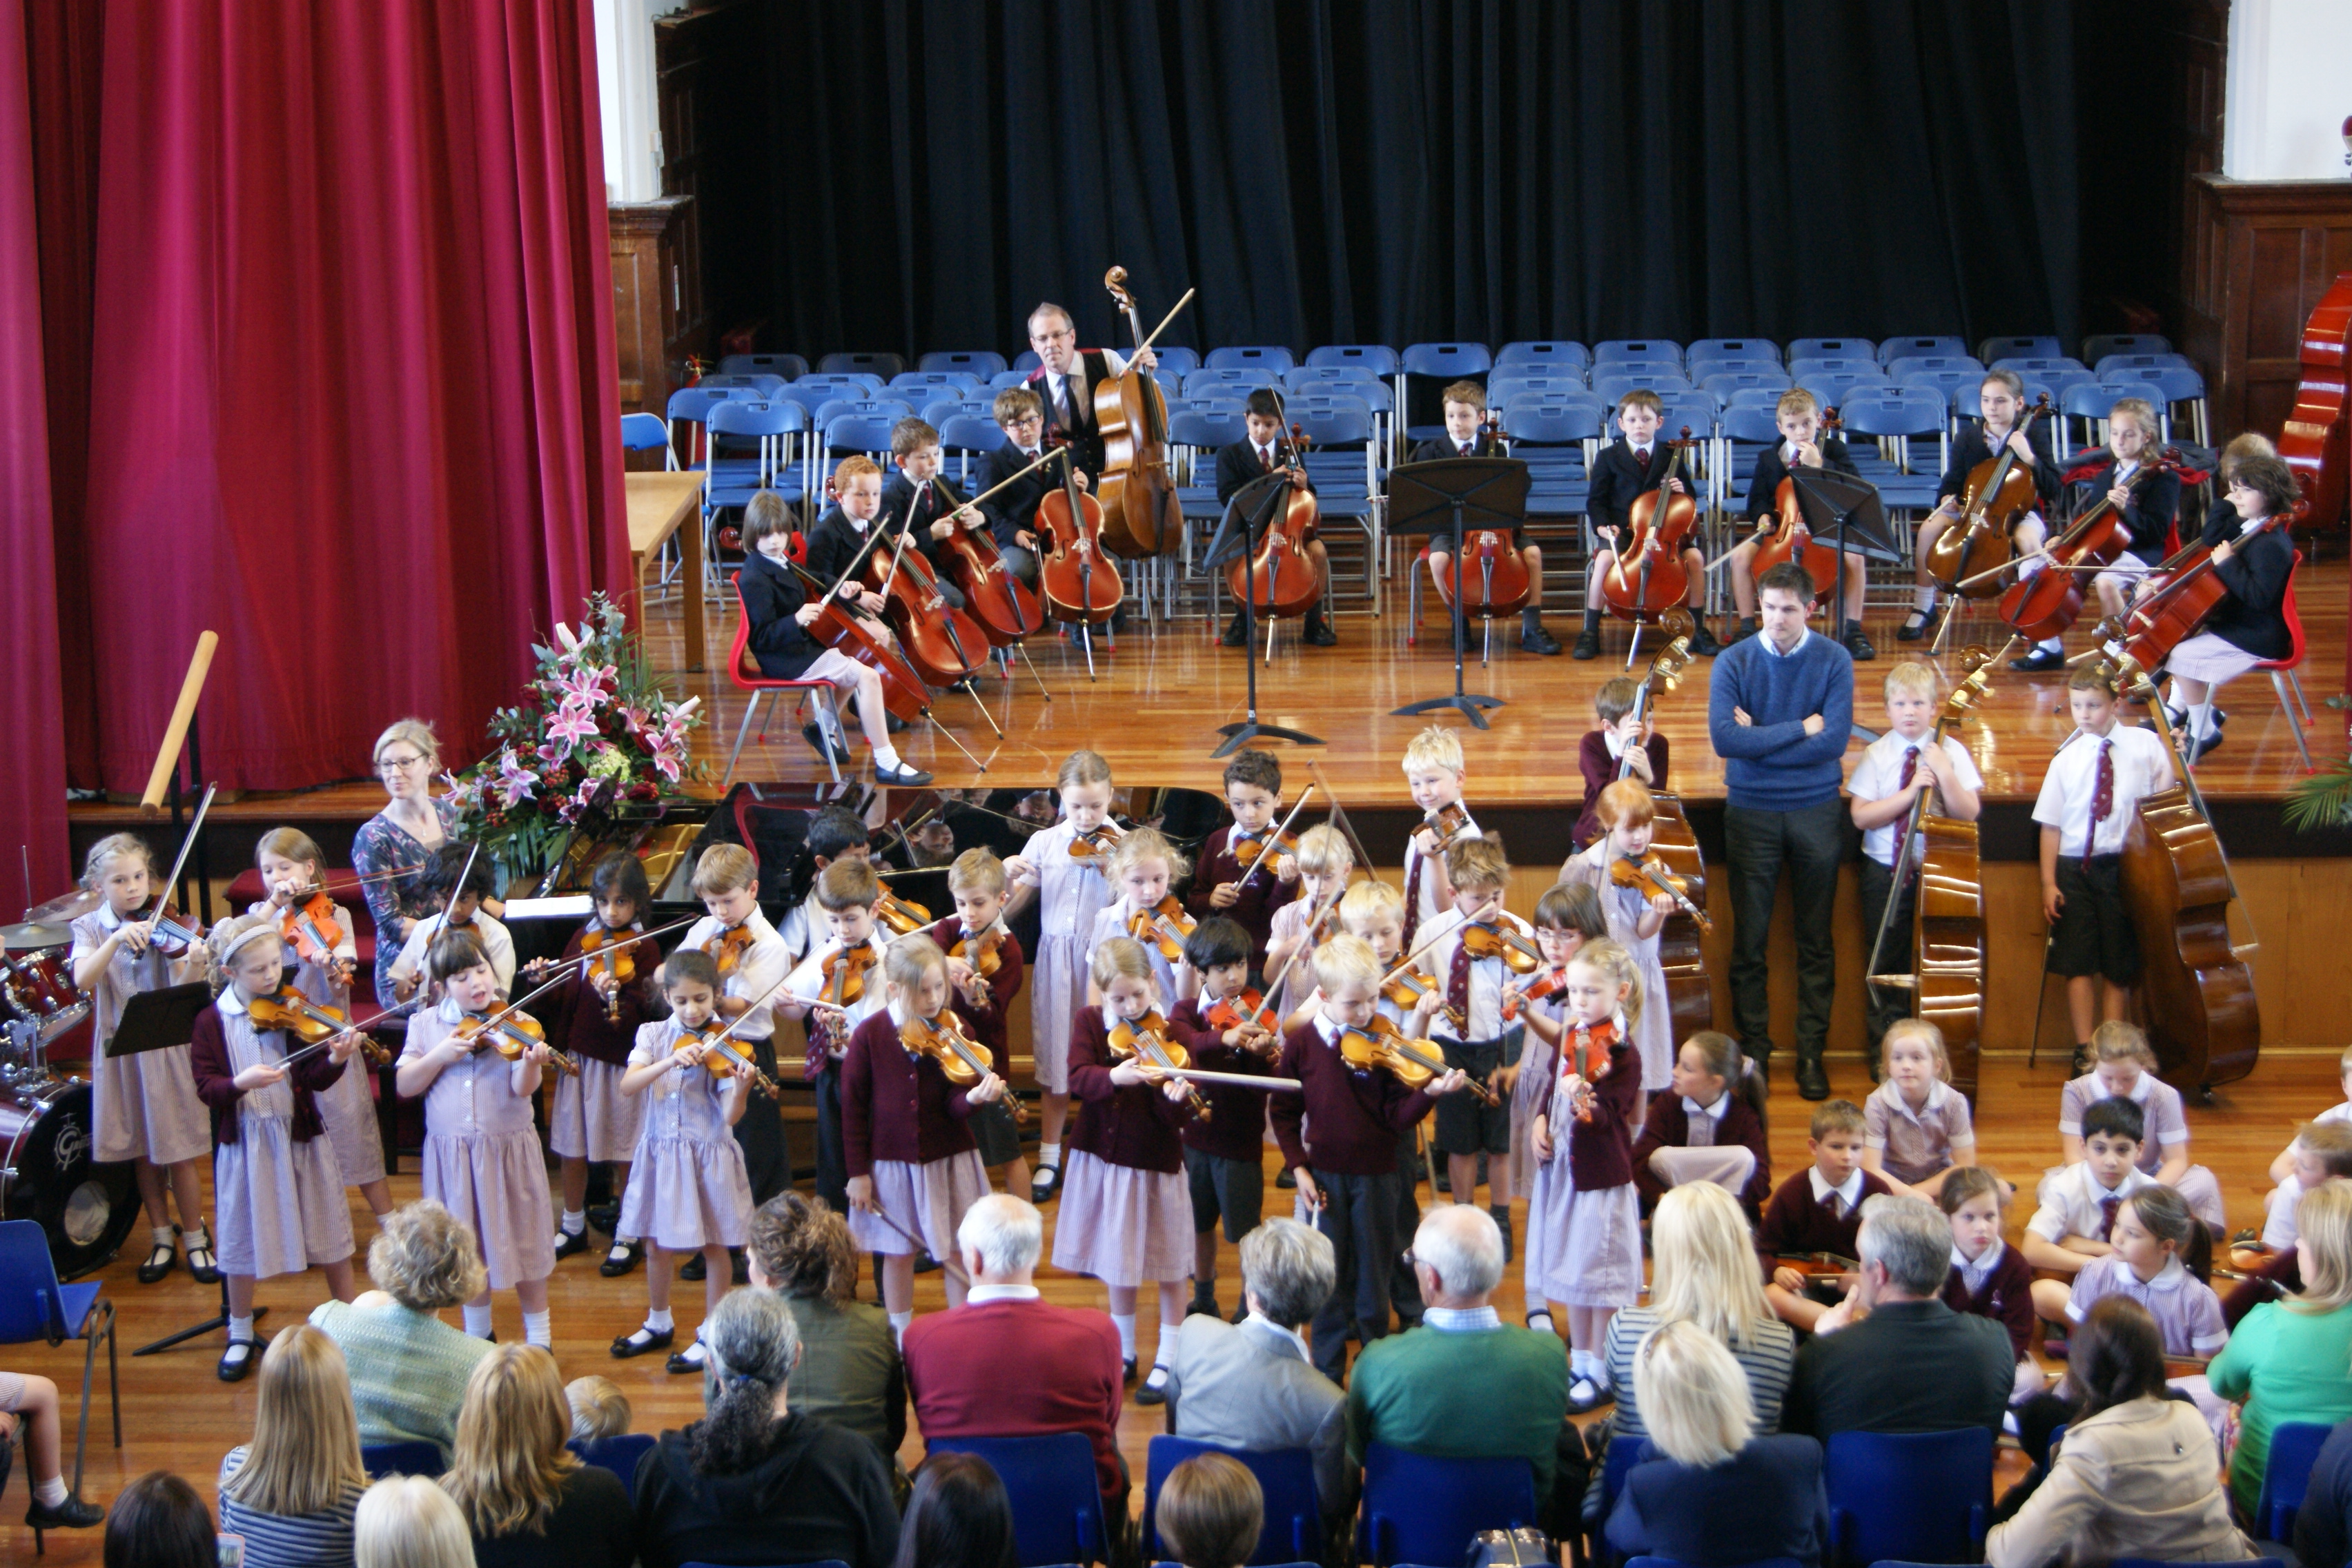 7th May 2015, Year 3 Strings Concert in Routh Hall